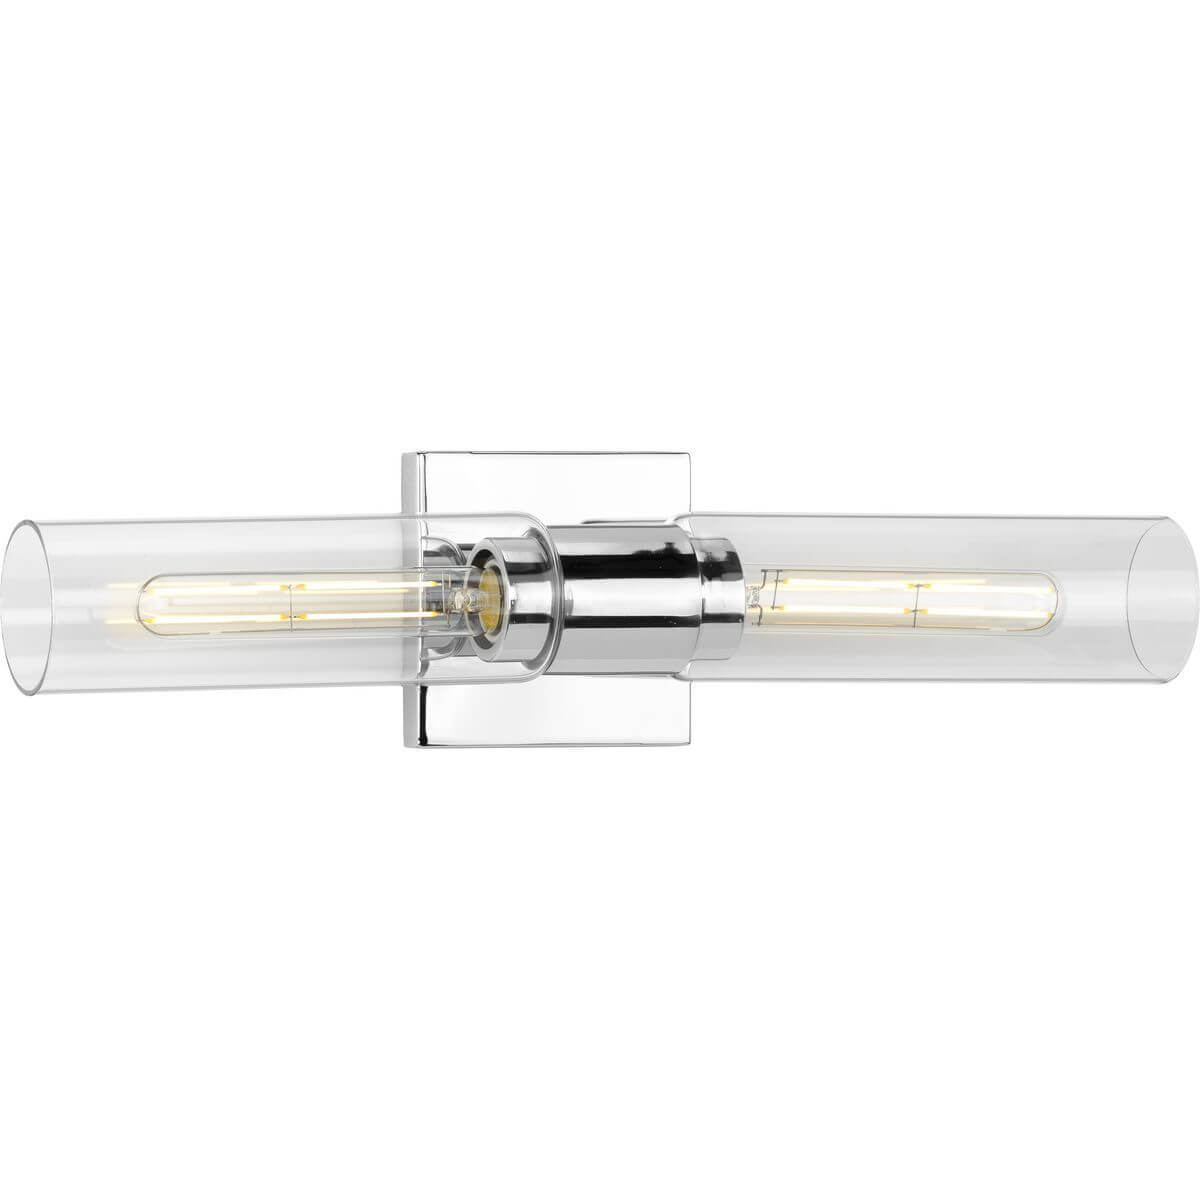 Progress Lighting Clarion 2 Light 20 inch Bath Vanity Light in Polished Chrome with Clear Glass P300300-015